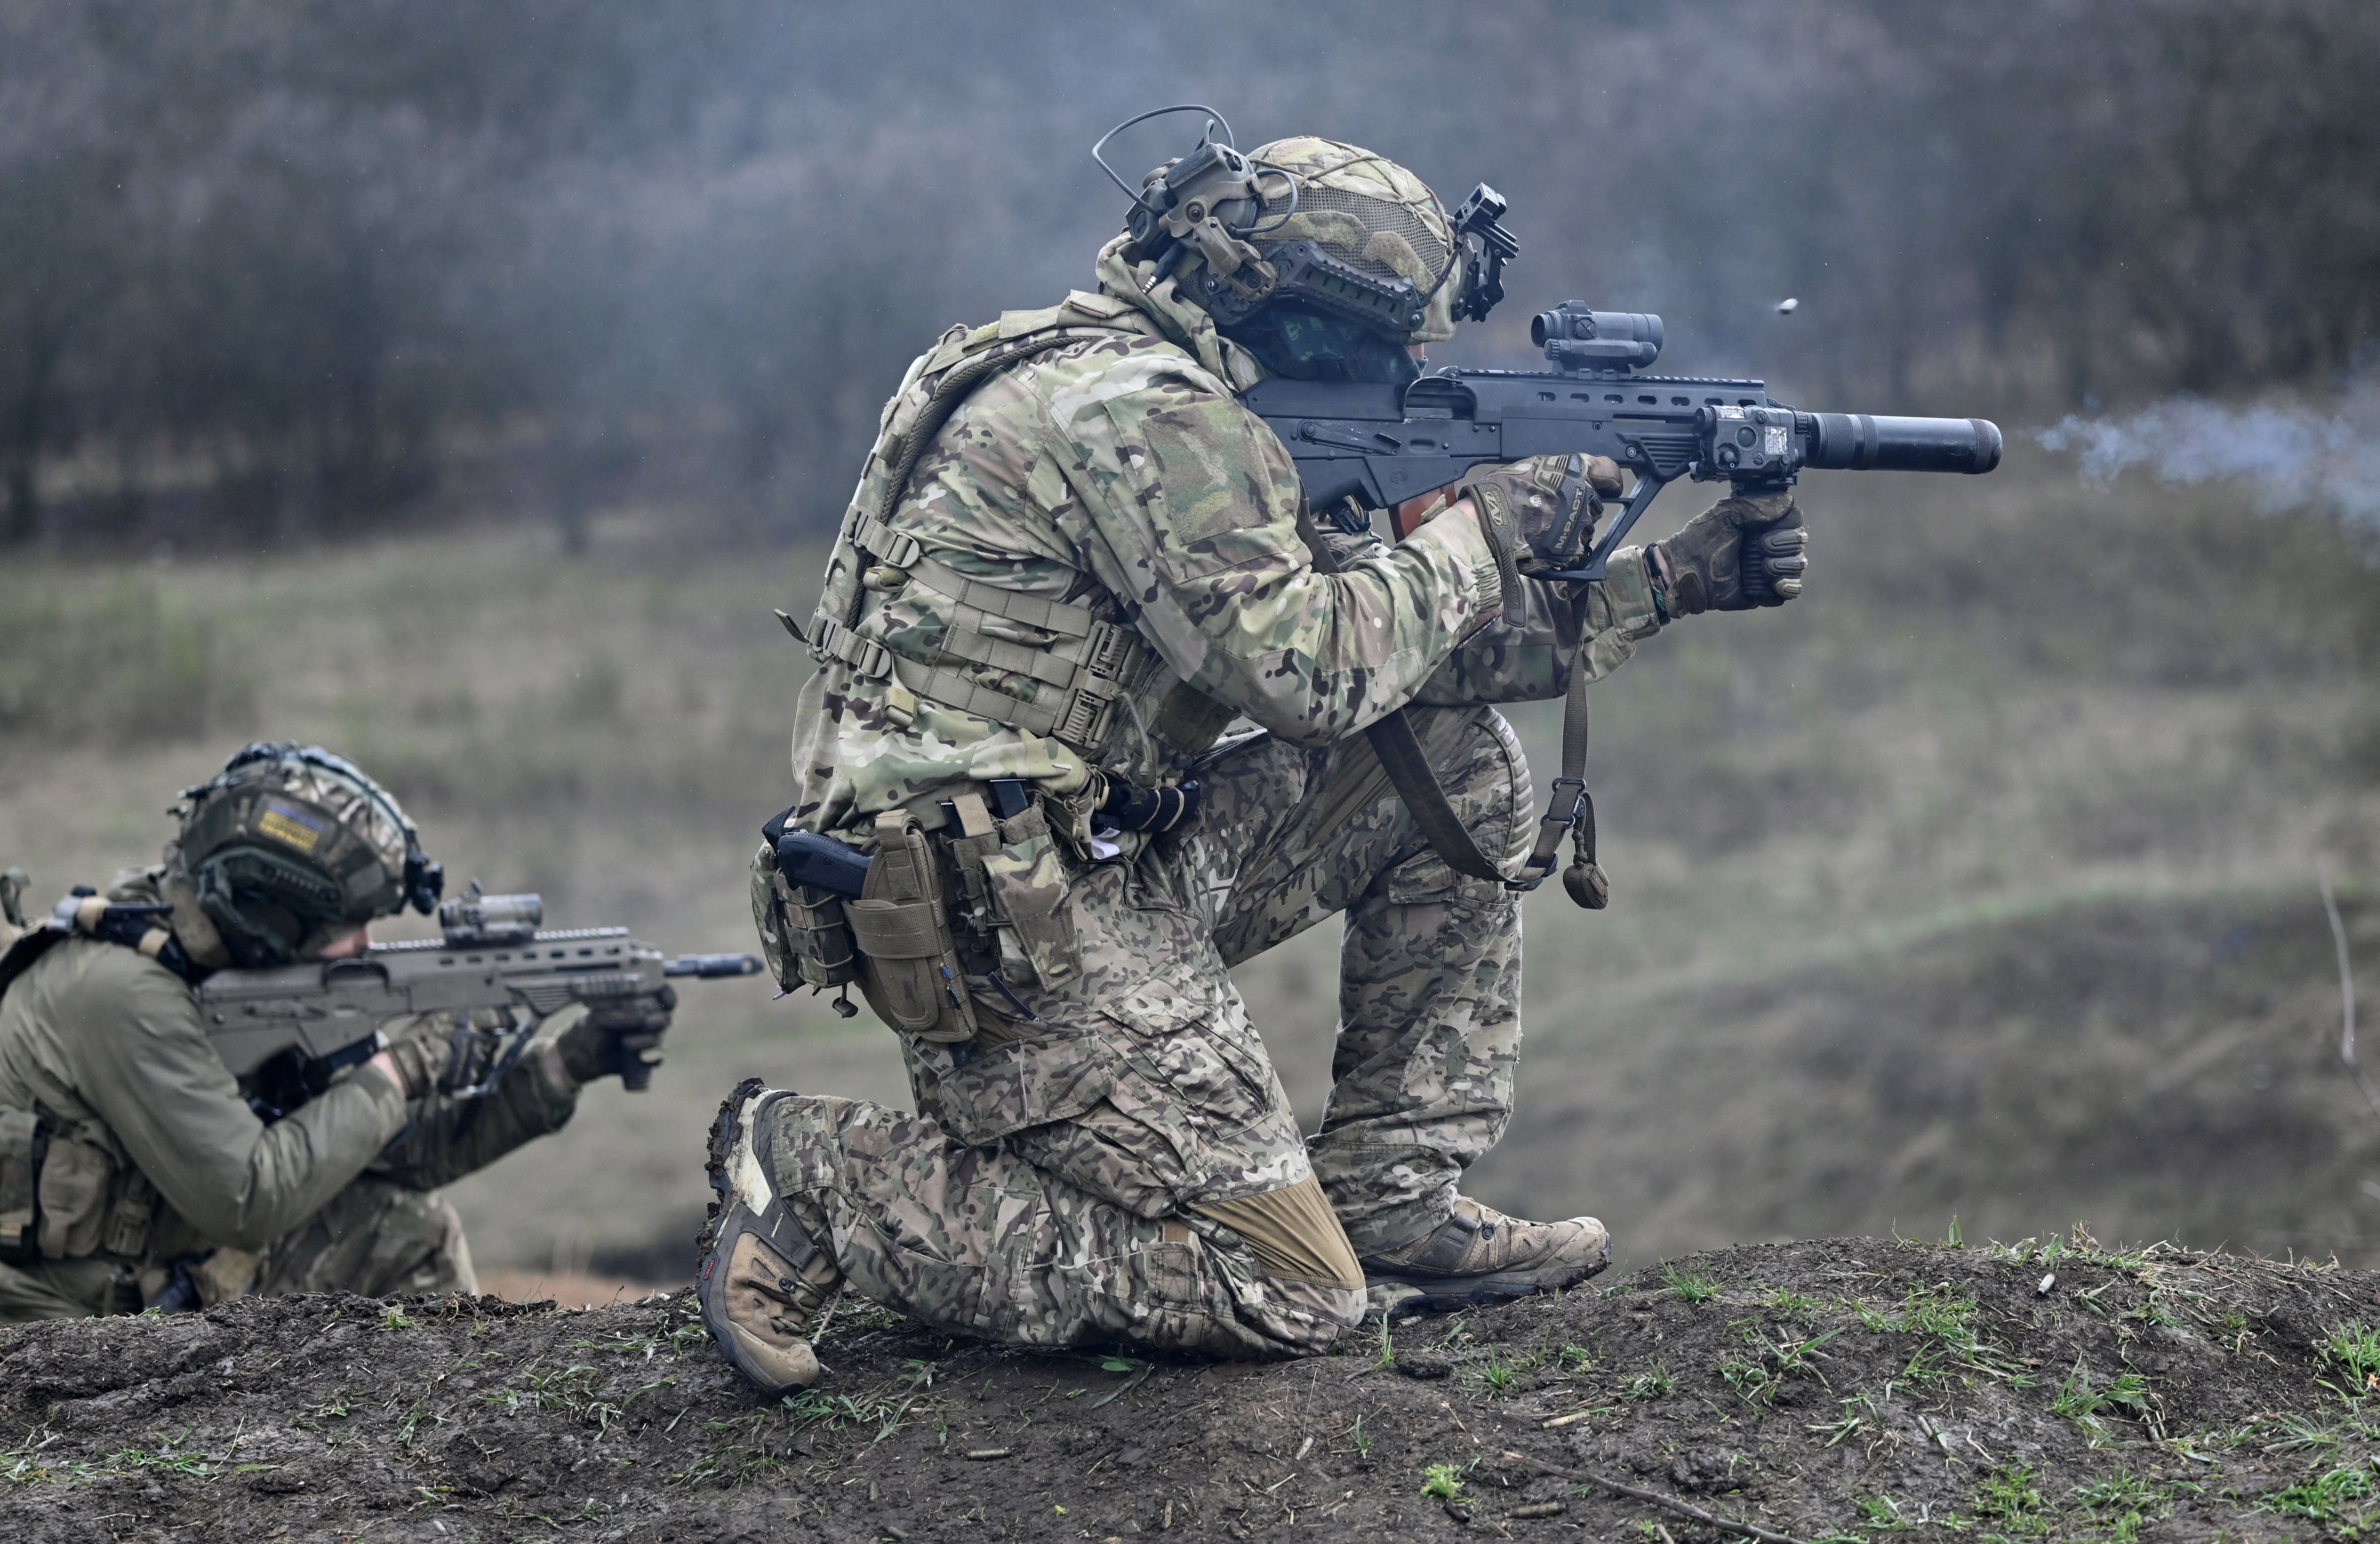 <p>A Ukrainian Special Forces serviceman (R) fires a Ukrainian made Malyuk assault rifle during a training exercise in Donetsk region amid the Russian invasion of Ukraine </p>